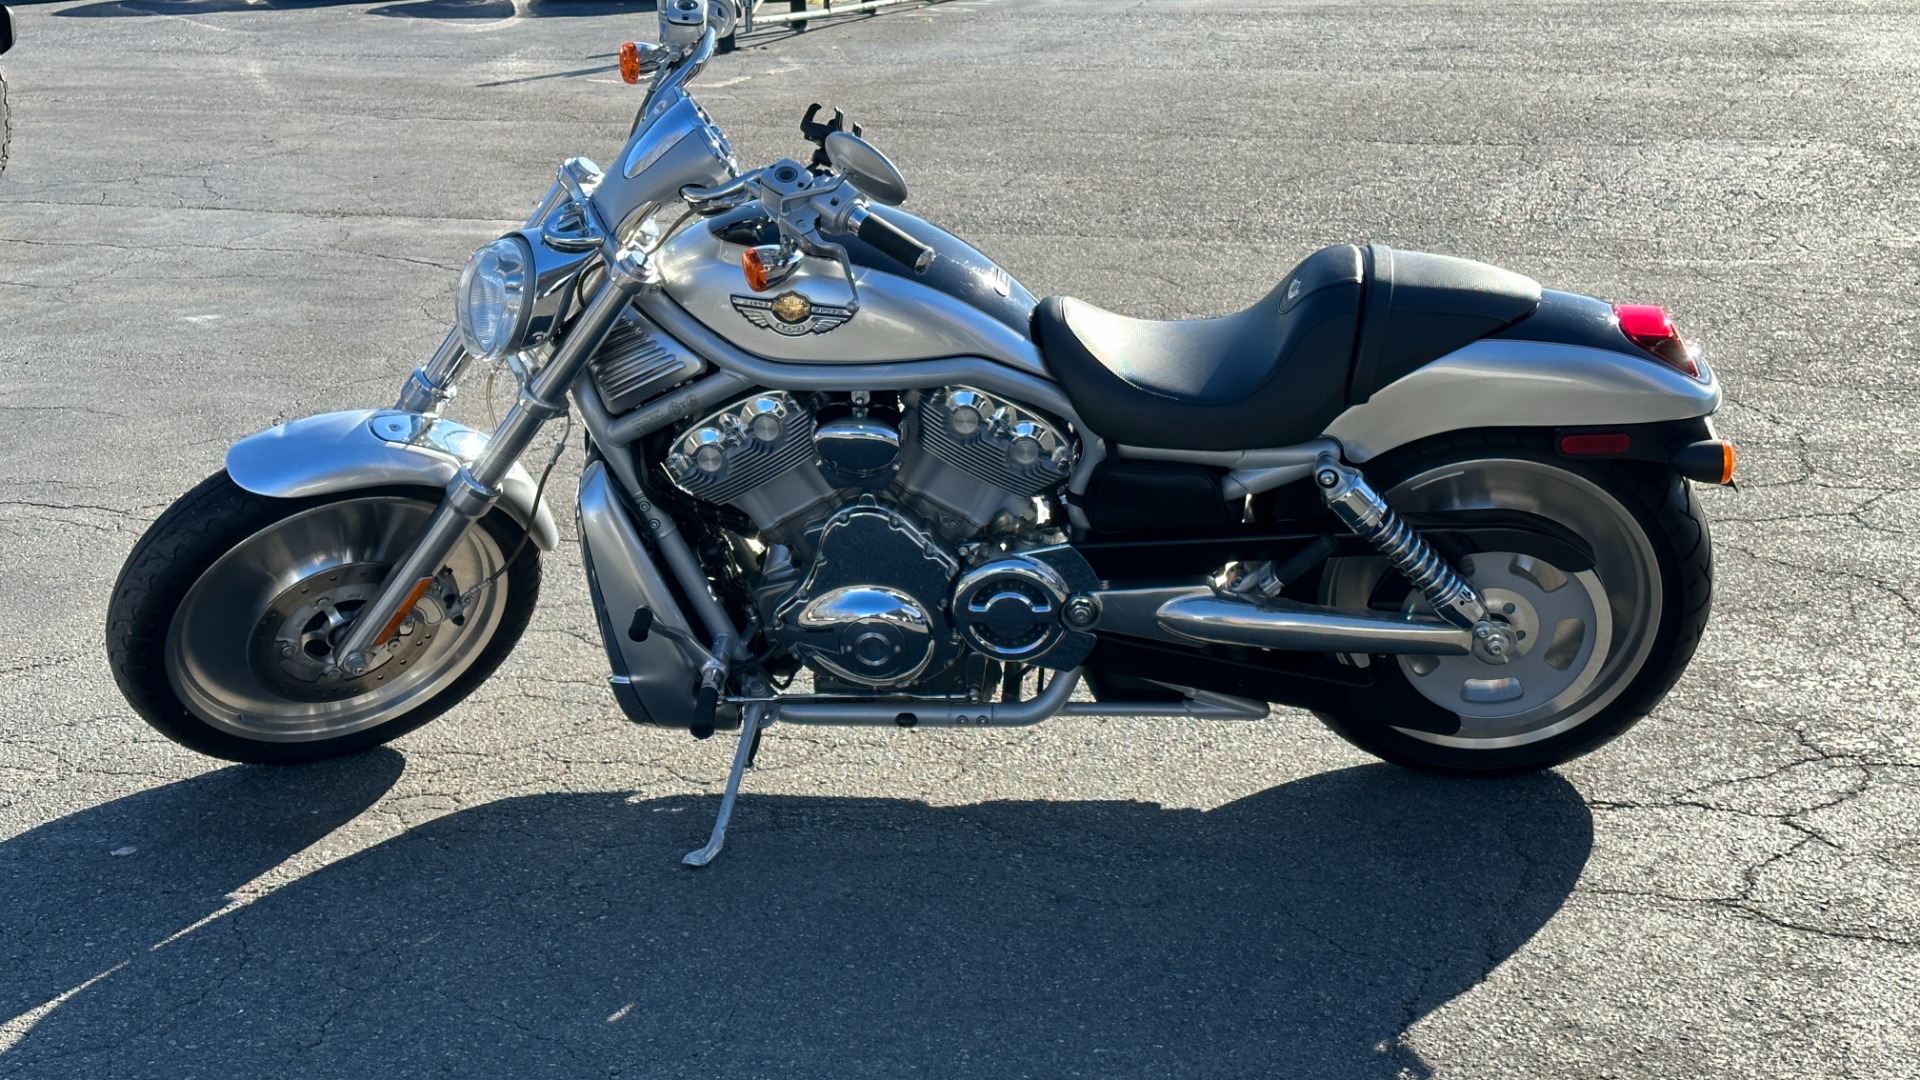 Used 2003 Harley Davidson V Rod ANNIVERSARY EDITION / 1130CC ENGINE / BREMBO BRAKES / VORTEX AIR SCOOPS for sale $9,995 at Formula Imports in Charlotte NC 28227 5